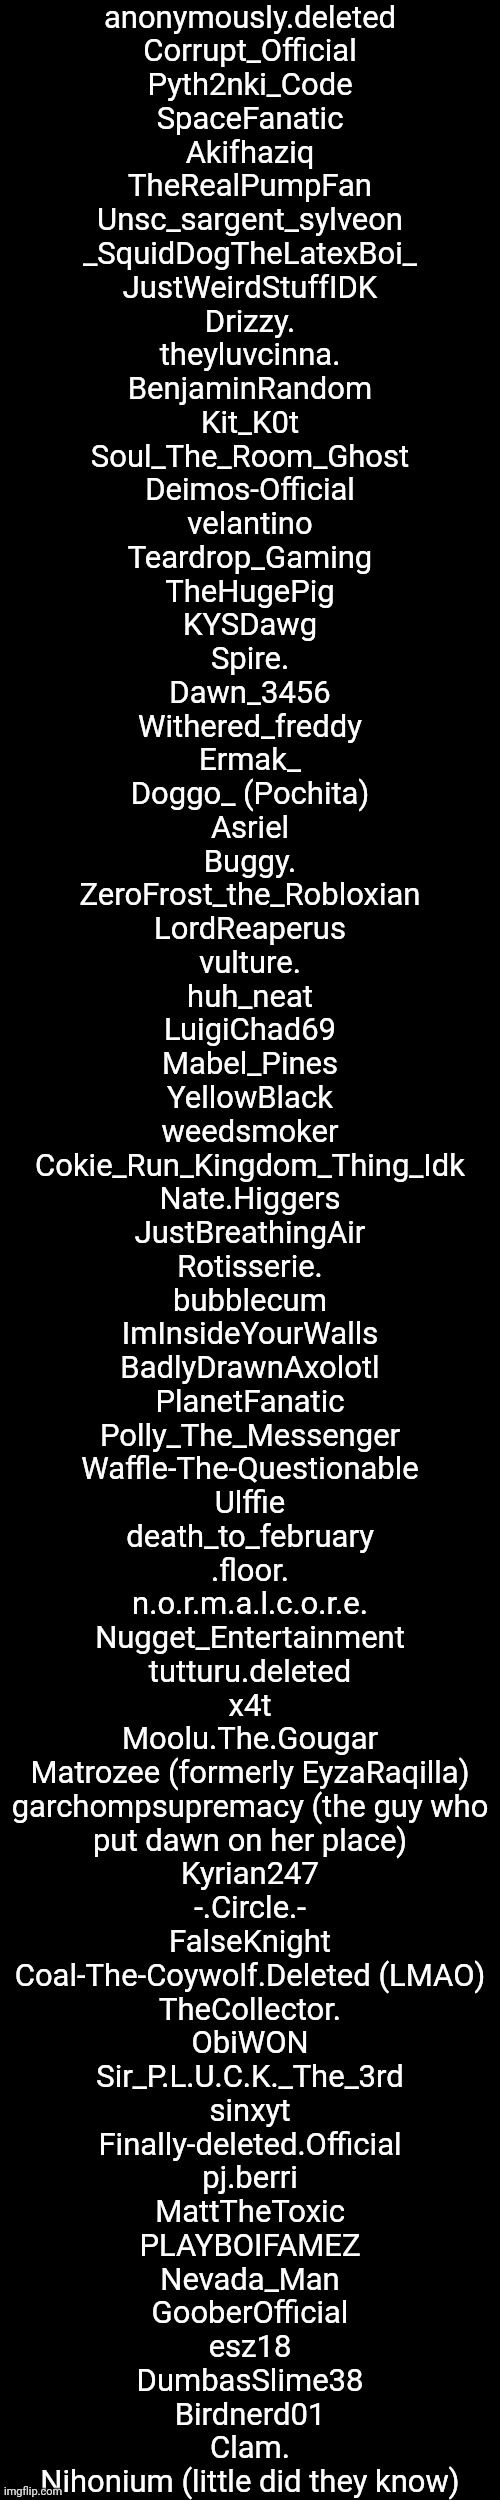 List of Names (Pt. 3) | anonymously.deleted
Corrupt_Official
Pyth2nki_Code
SpaceFanatic
Akifhaziq
TheRealPumpFan
Unsc_sargent_sylveon
_SquidDogTheLatexBoi_
JustWeirdStuffIDK
Drizzy.
theyluvcinna.
BenjaminRandom
Kit_K0t
Soul_The_Room_Ghost
Deimos-Official
velantino
Teardrop_Gaming
TheHugePig
KYSDawg
Spire.
Dawn_3456
Withered_freddy
Ermak_
Doggo_ (Pochita)
Asriel
Buggy.
ZeroFrost_the_Robloxian
LordReaperus
vulture.
huh_neat
LuigiChad69
Mabel_Pines
YellowBlack
weedsmoker
Cokie_Run_Kingdom_Thing_Idk
Nate.Higgers
JustBreathingAir
Rotisserie.
bubblecum
ImInsideYourWalls
BadlyDrawnAxolotl
PlanetFanatic
Polly_The_Messenger
Waffle-The-Questionable
Ulffie
death_to_february
.floor.
n.o.r.m.a.l.c.o.r.e.
Nugget_Entertainment
tutturu.deleted
x4t
Moolu.The.Gougar
Matrozee (formerly EyzaRaqilla)
garchompsupremacy (the guy who
put dawn on her place)
Kyrian247
-.Circle.-
FalseKnight
Coal-The-Coywolf.Deleted (LMAO)
TheCollector.
ObiWON
Sir_P.L.U.C.K._The_3rd
sinxyt
Finally-deleted.Official
pj.berri
MattTheToxic
PLAYBOIFAMEZ
Nevada_Man
GooberOfficial
esz18
DumbasSlime38
Birdnerd01
Clam.
Nihonium (little did they know) | made w/ Imgflip meme maker